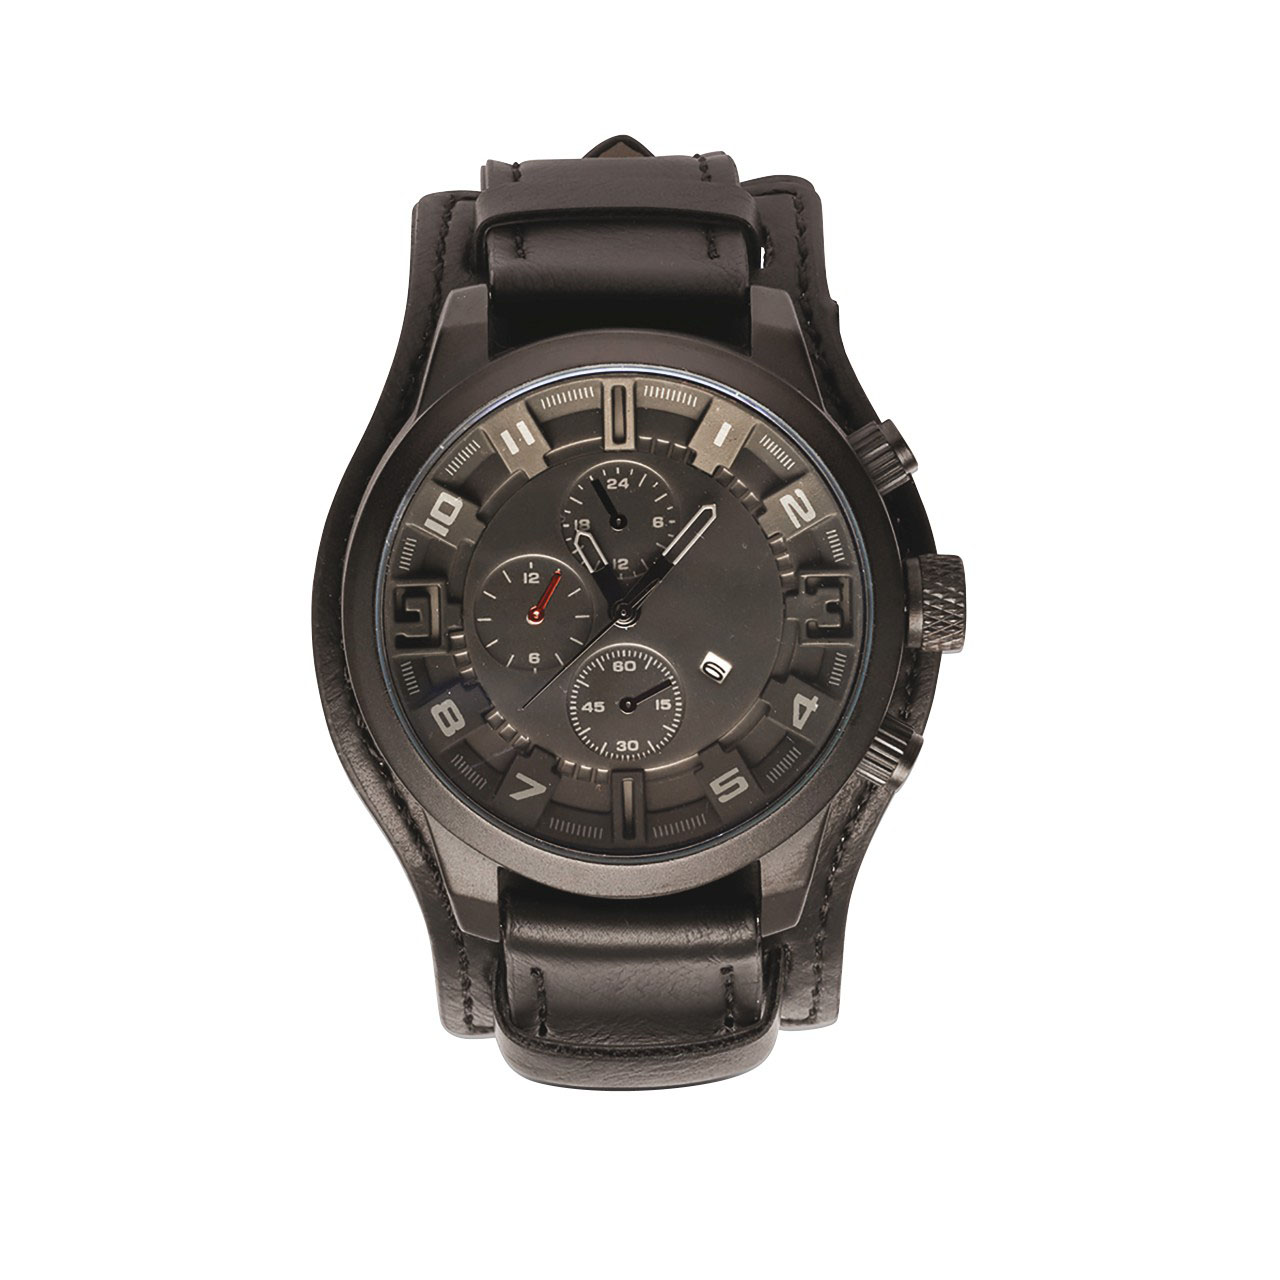 Men's Special Operations Black Watch